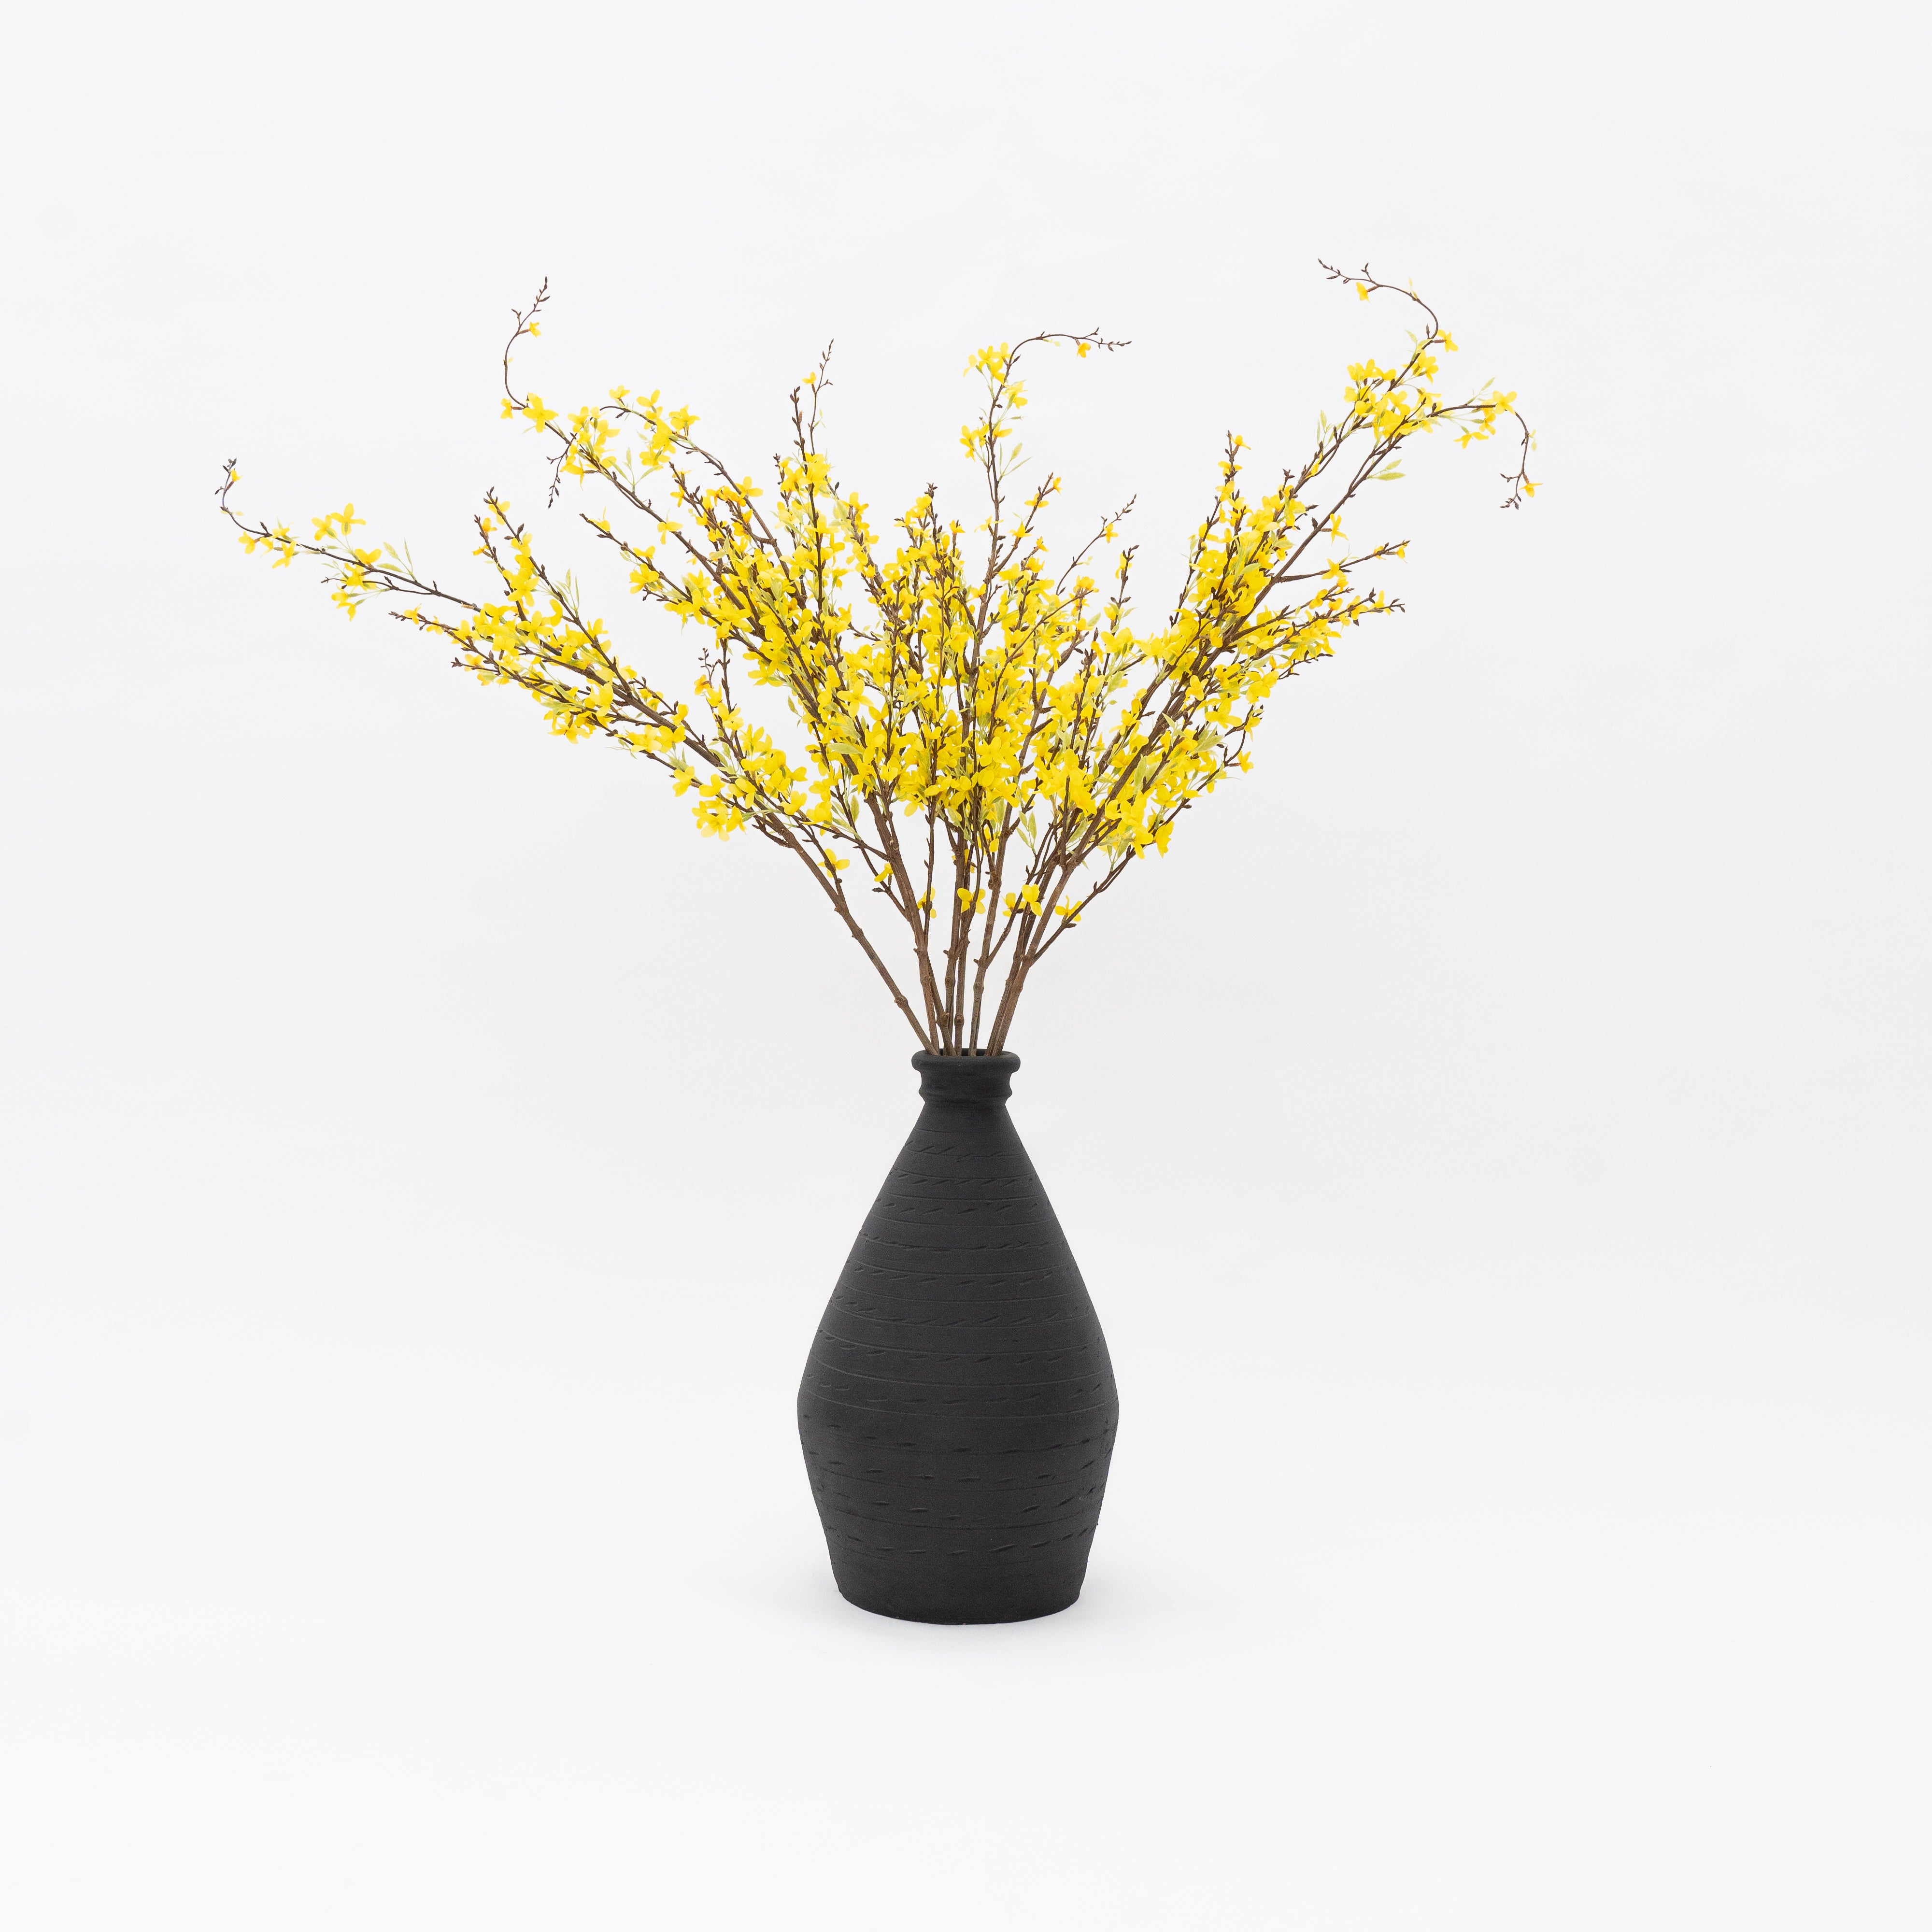 Artificial Plant - Winter Jasmine  - WS Living - UAE - Artificial Flowers Wood and steel Furnitures - Dubai